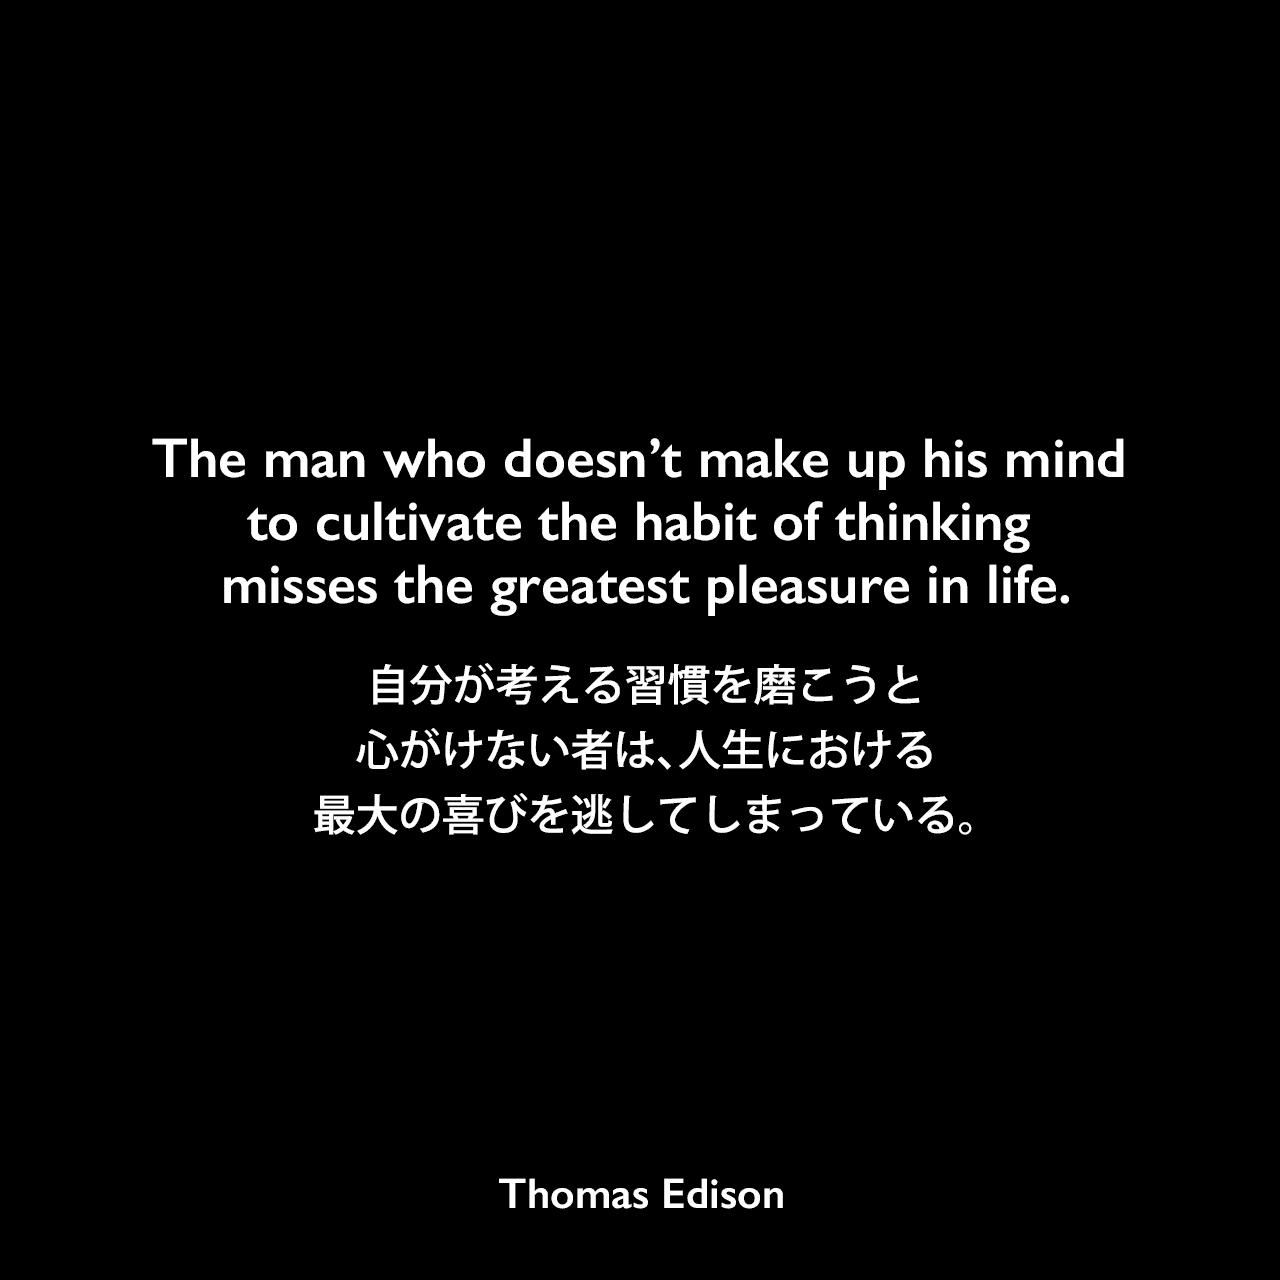 The man who doesn’t make up his mind to cultivate the habit of thinking misses the greatest pleasure in life.自分が考える習慣を磨こうと心がけない者は、人生における最大の喜びを逃してしまっている。- Edison Innovation Foundationより